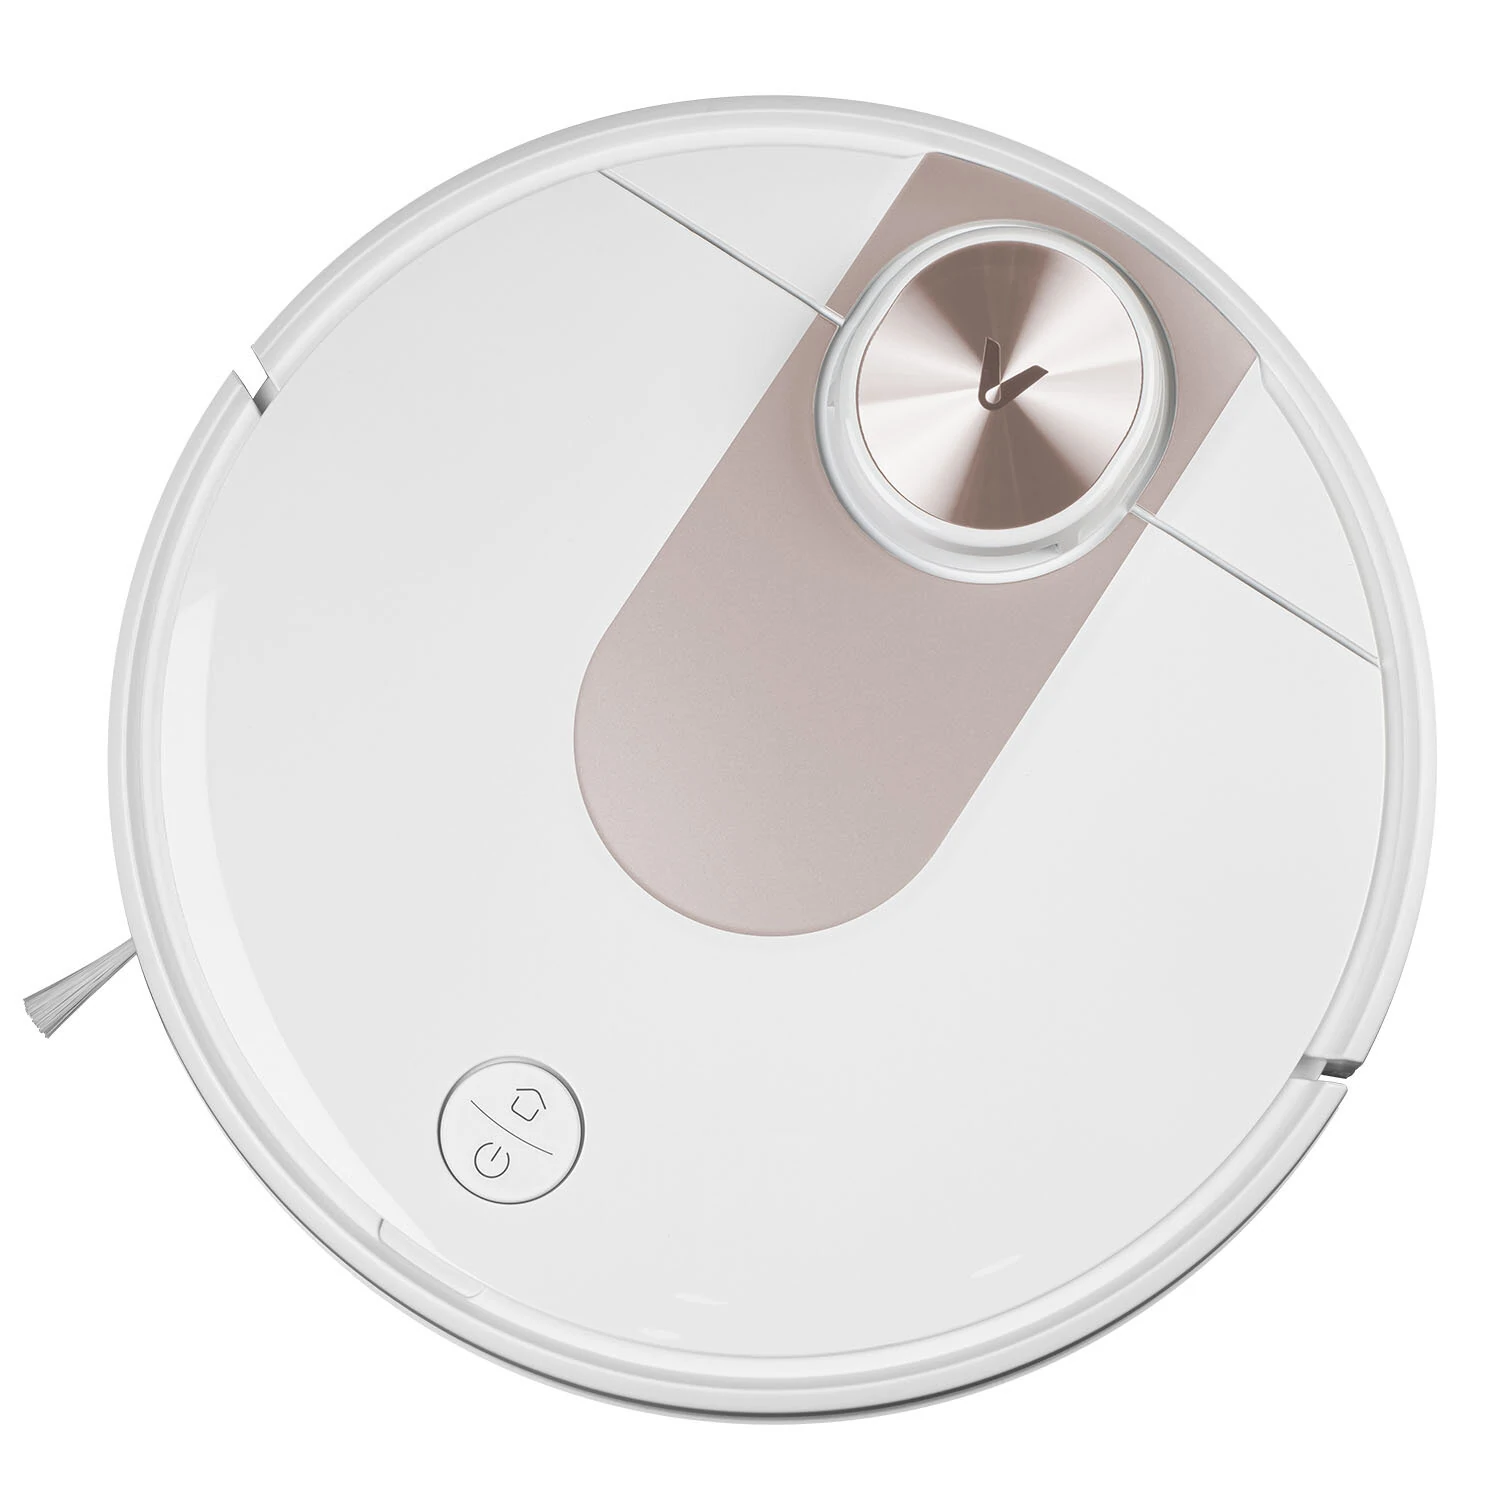 Viomi SE Robot Vacuum Cleaner Laser Navigation 2200Pa Suction Y-Mopping 3200mAh Battery Multi-language APP Control Scheduled Mopping for Pets Hair Floors Carpets
Brand: VIOMI  4.9 201 Reviews 12 answered questions ID: 1761916
£371.06
£441.73
-16%
Inclusive of VAT